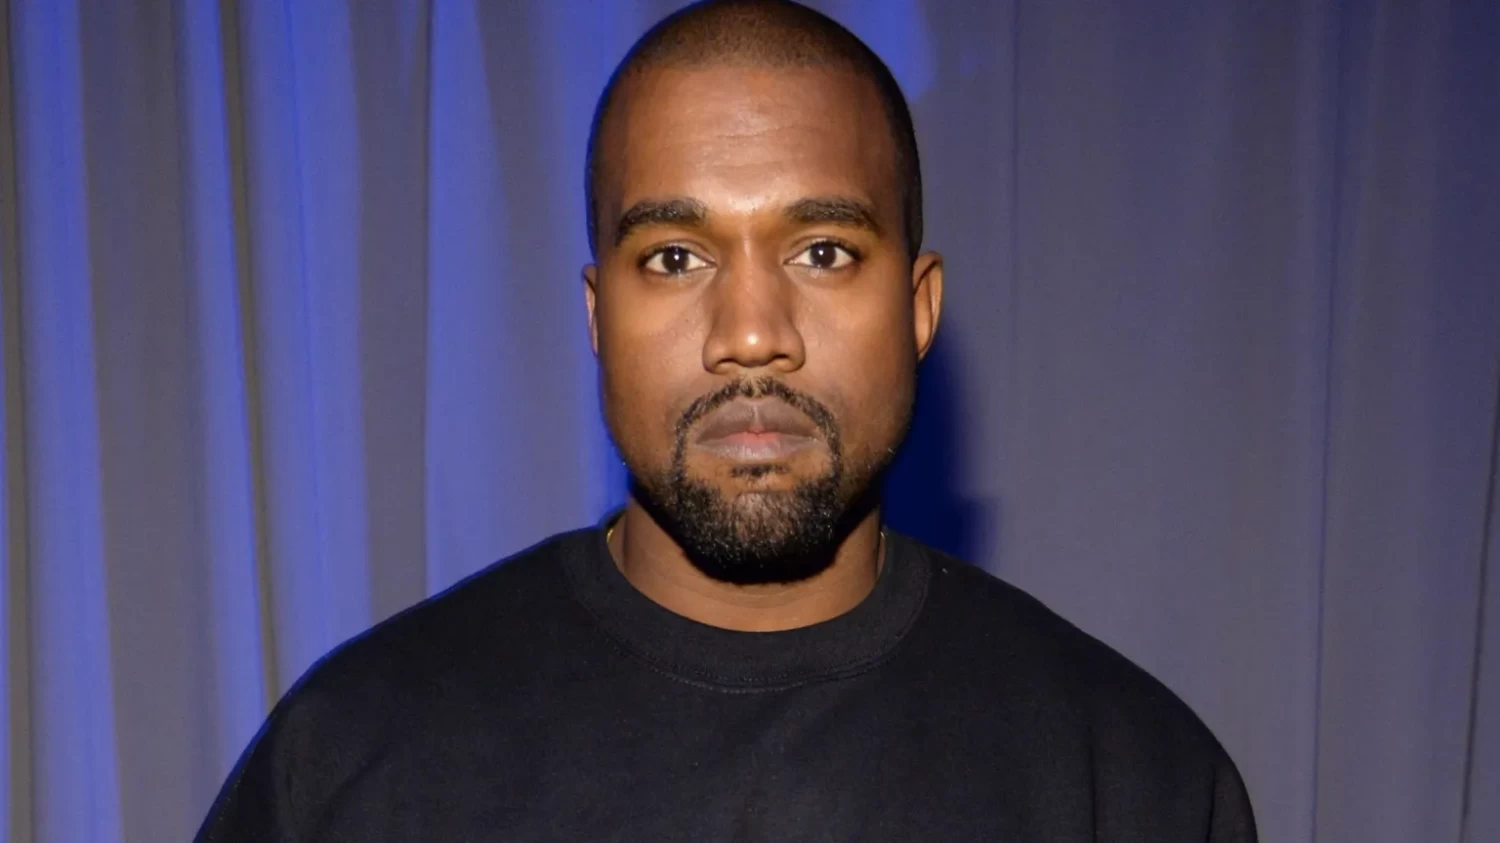 Kanye West has denied the accusations made by his former assistant. Getty Images